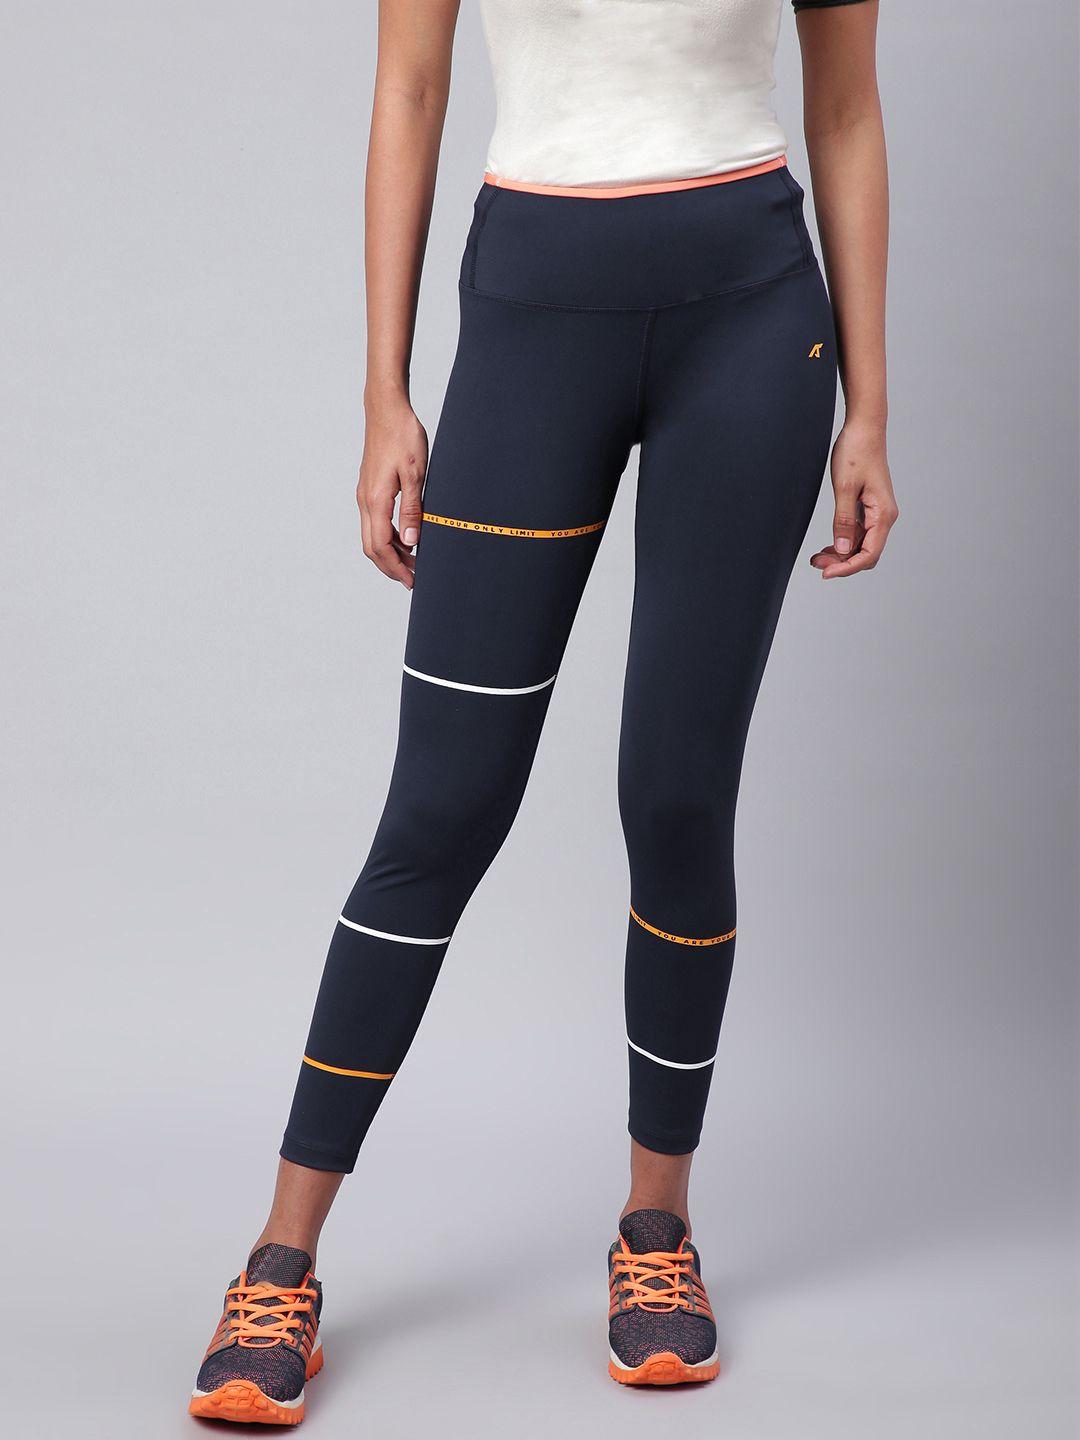 alcis-women-navy-blue-striped-secure-fit-cropped-training-tights